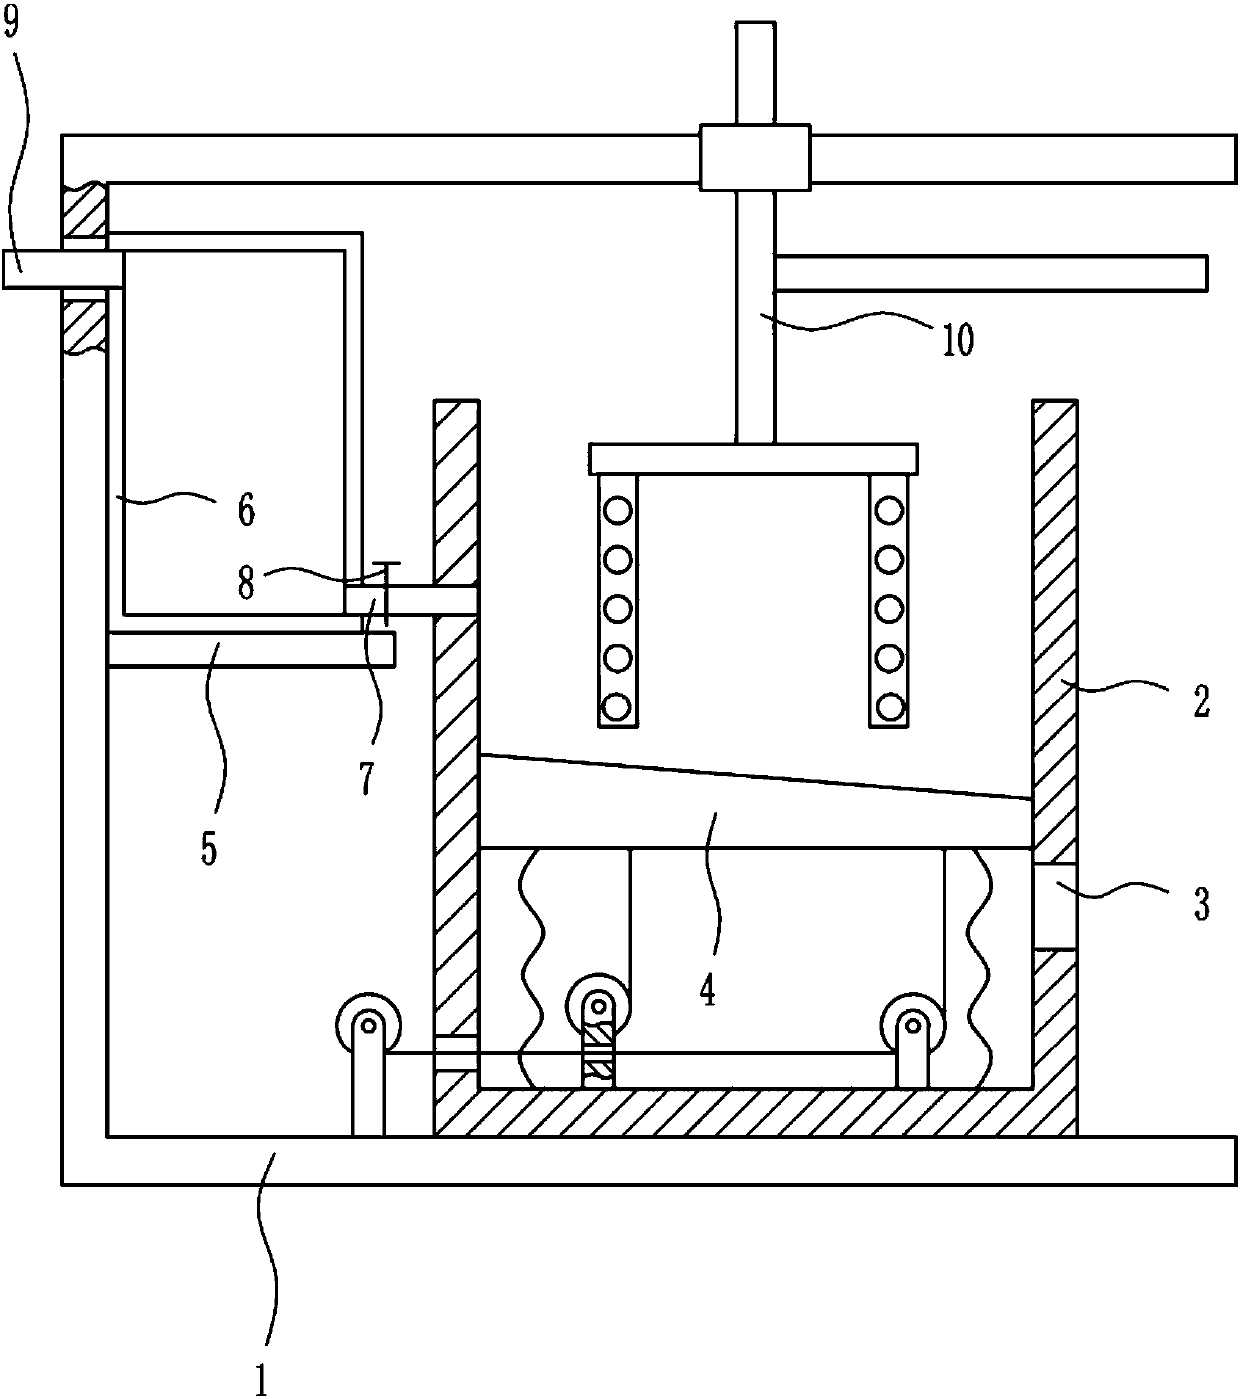 Efficient cement paste manufacturing device preventing cement paste from splashing